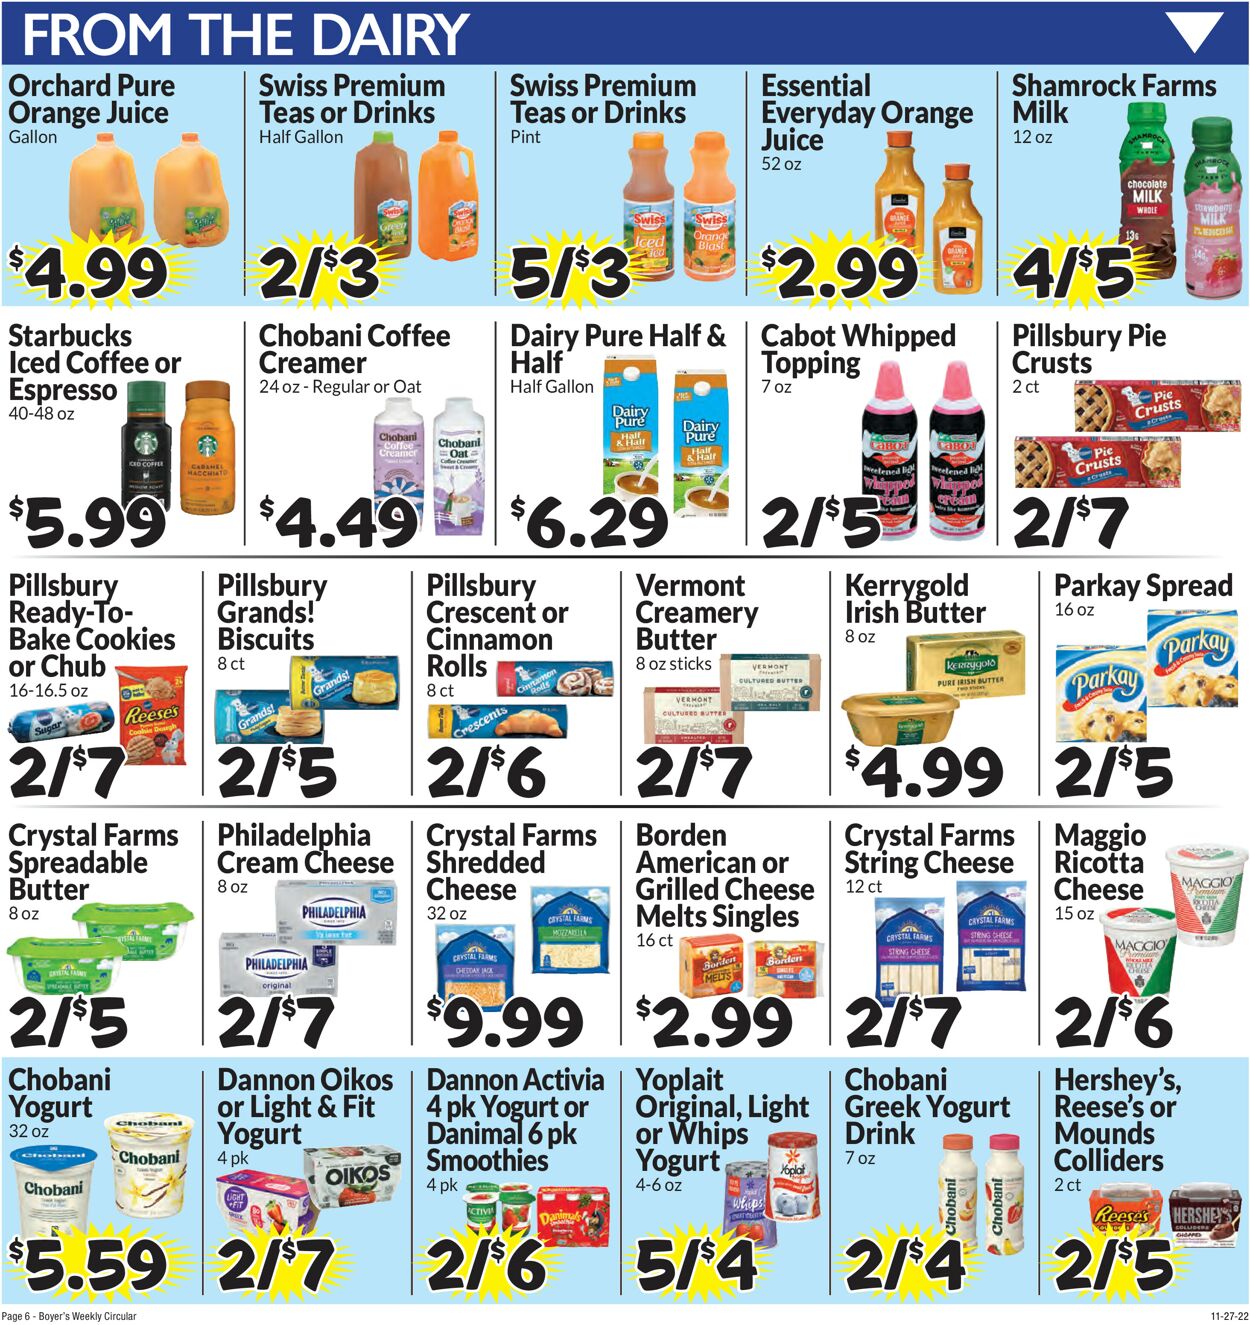 Boyer's Food Markets Ad from 11/27/2022